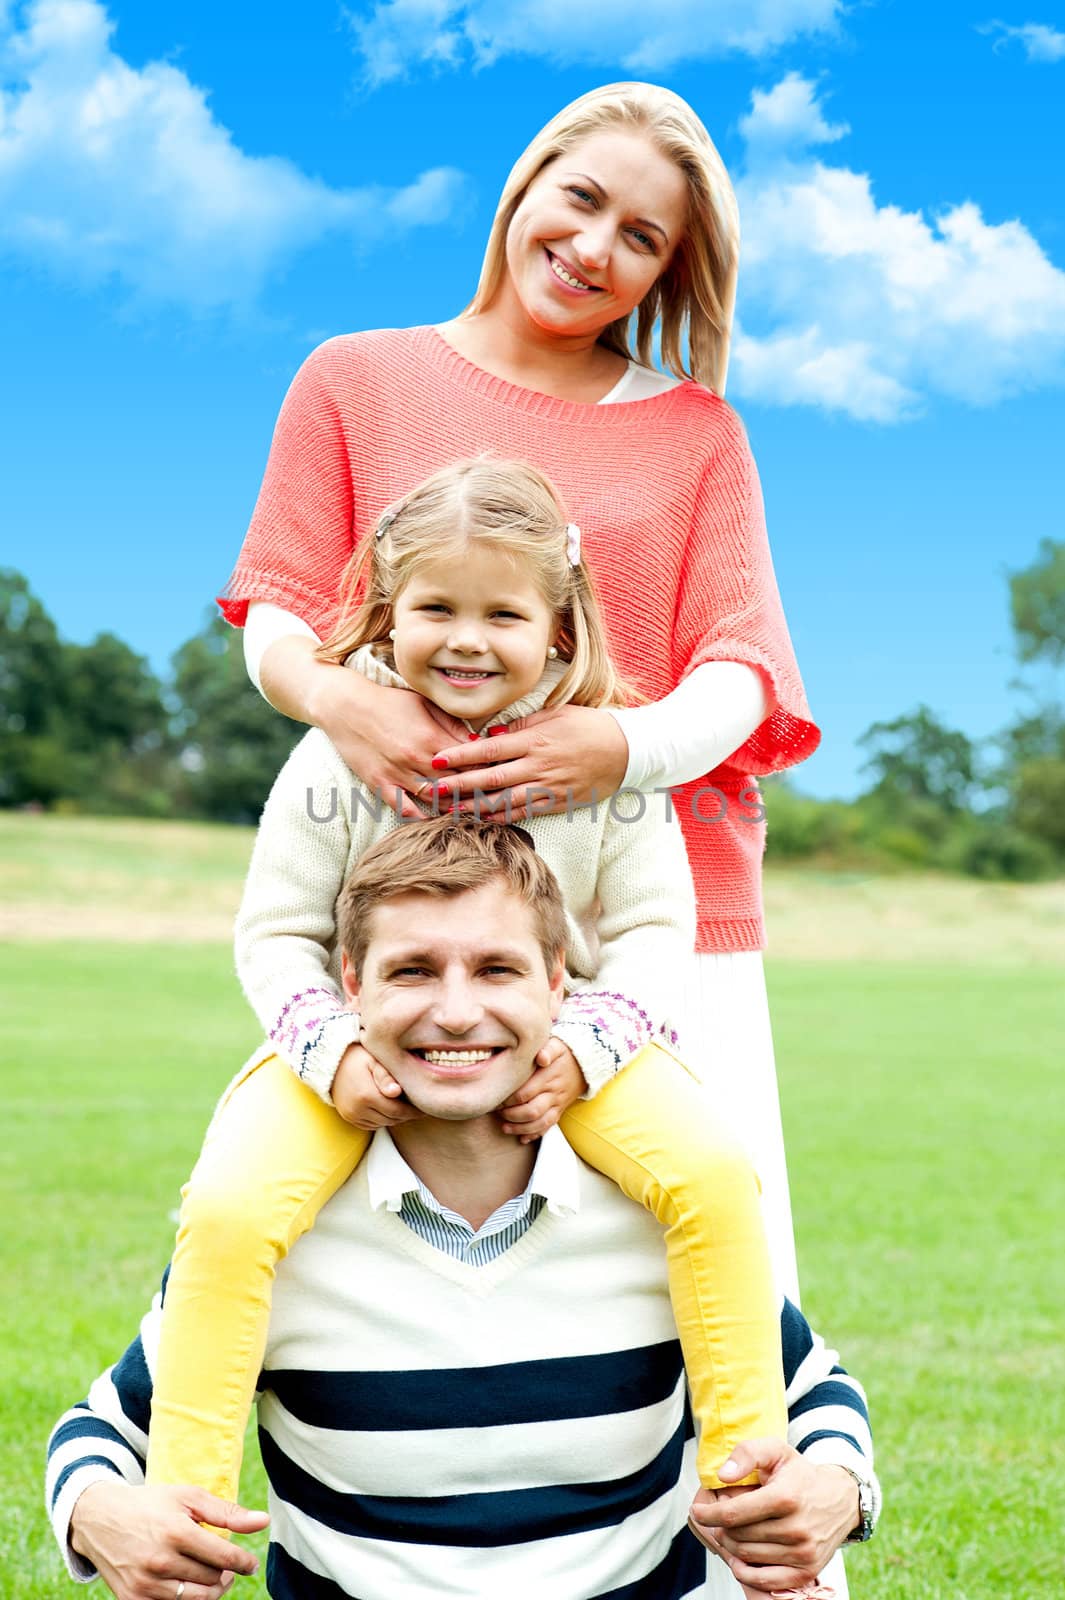 An attractive happy smiling family of mother, father and daughter having fun outside in a park